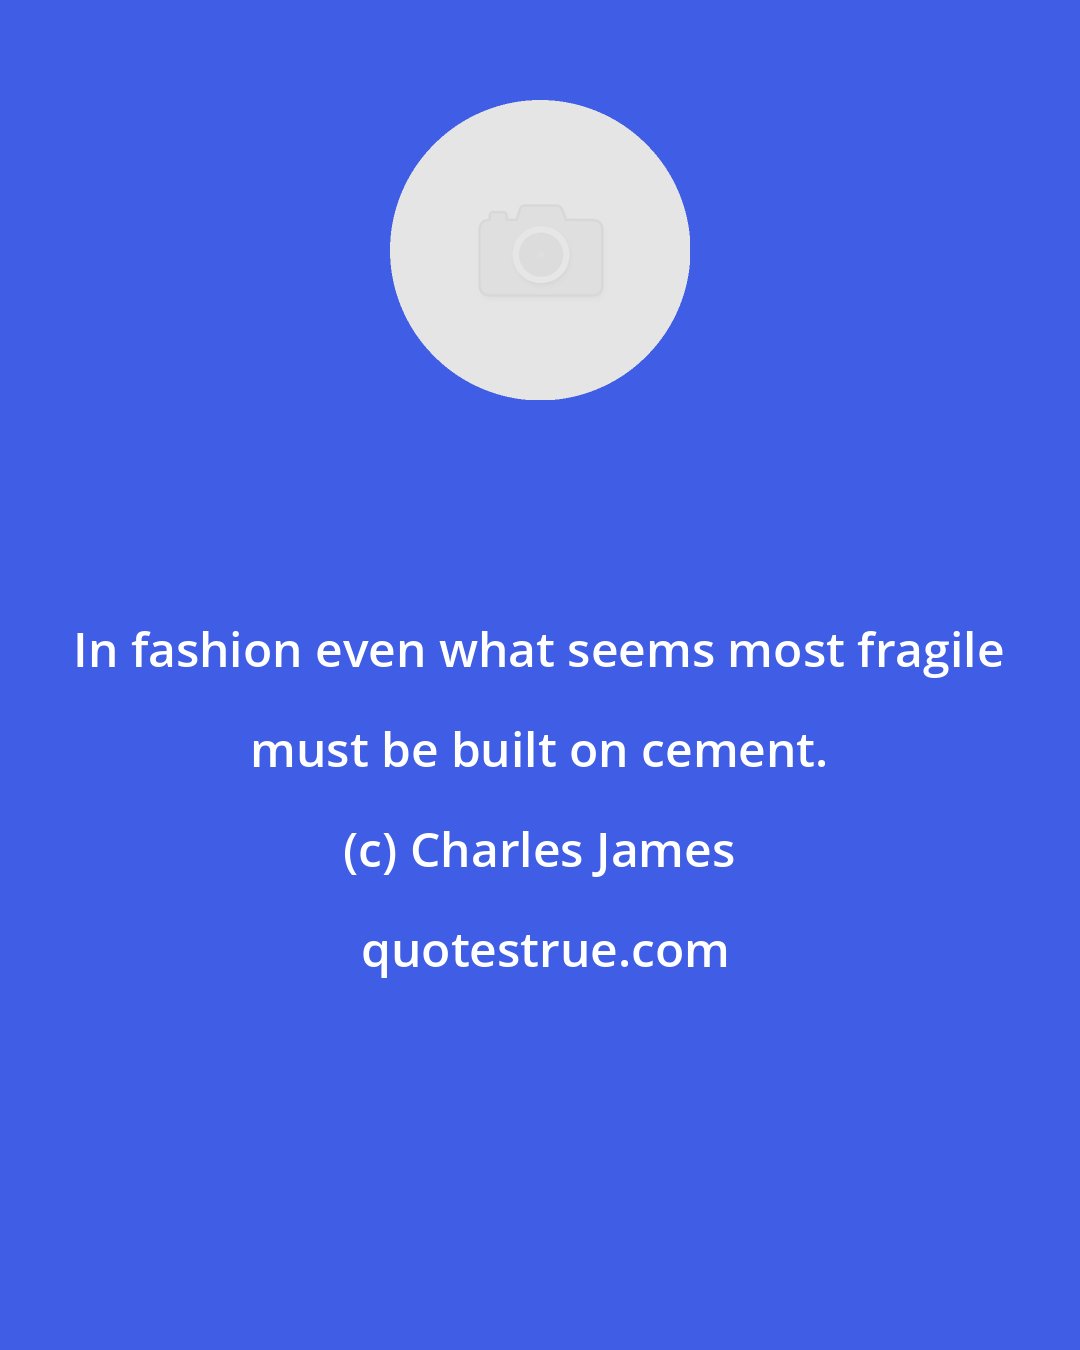 Charles James: In fashion even what seems most fragile must be built on cement.